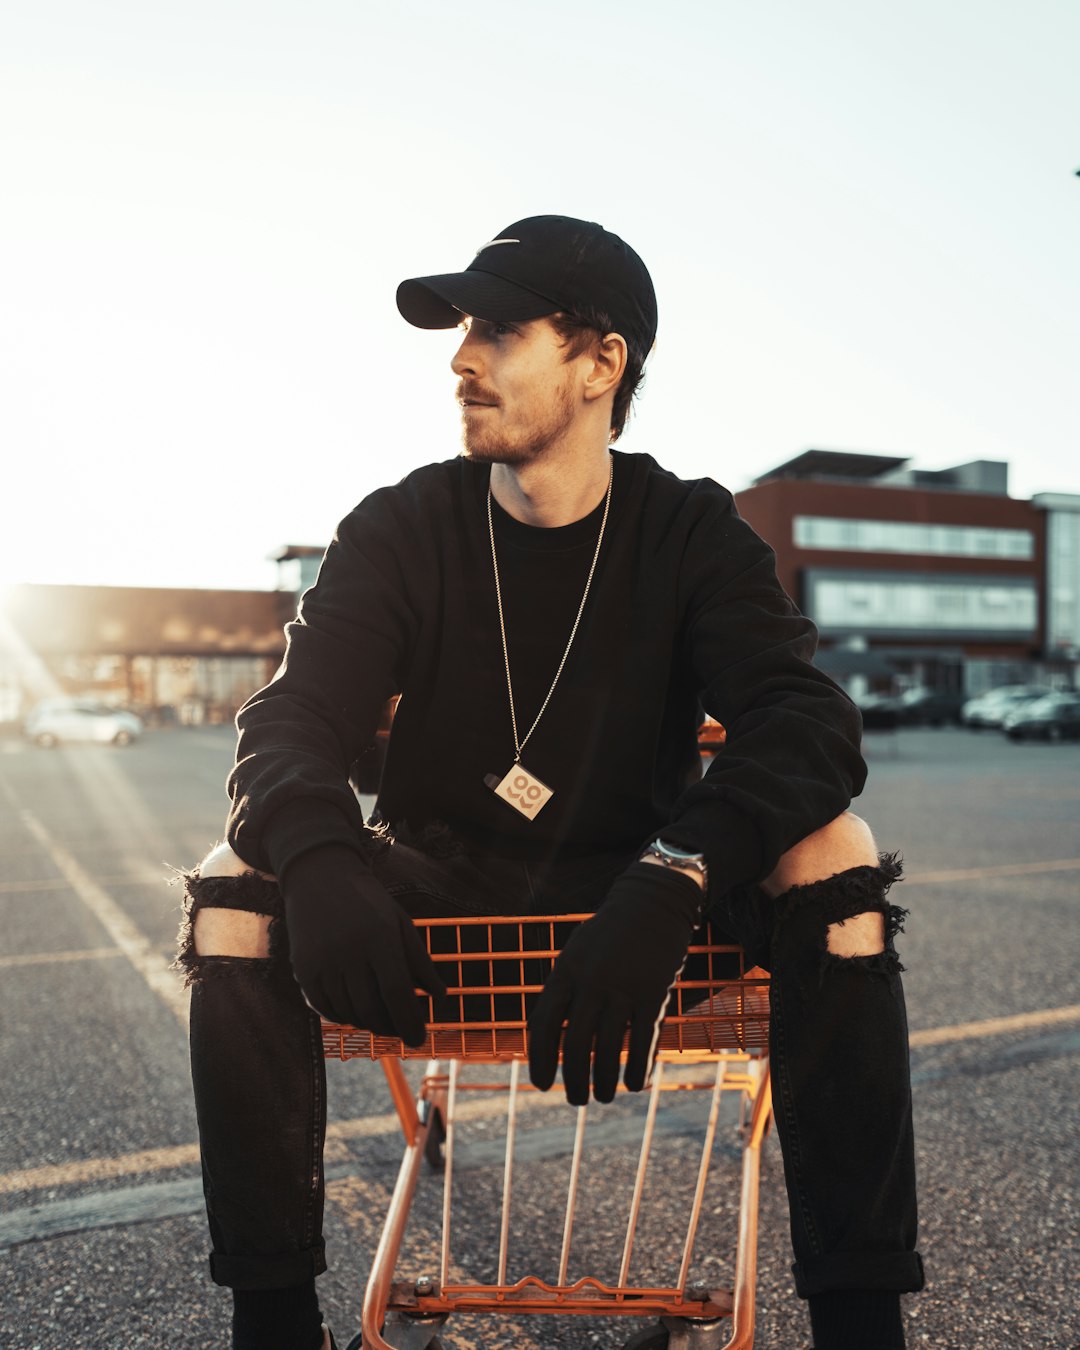 man in black jacket and black pants sitting on shopping cart